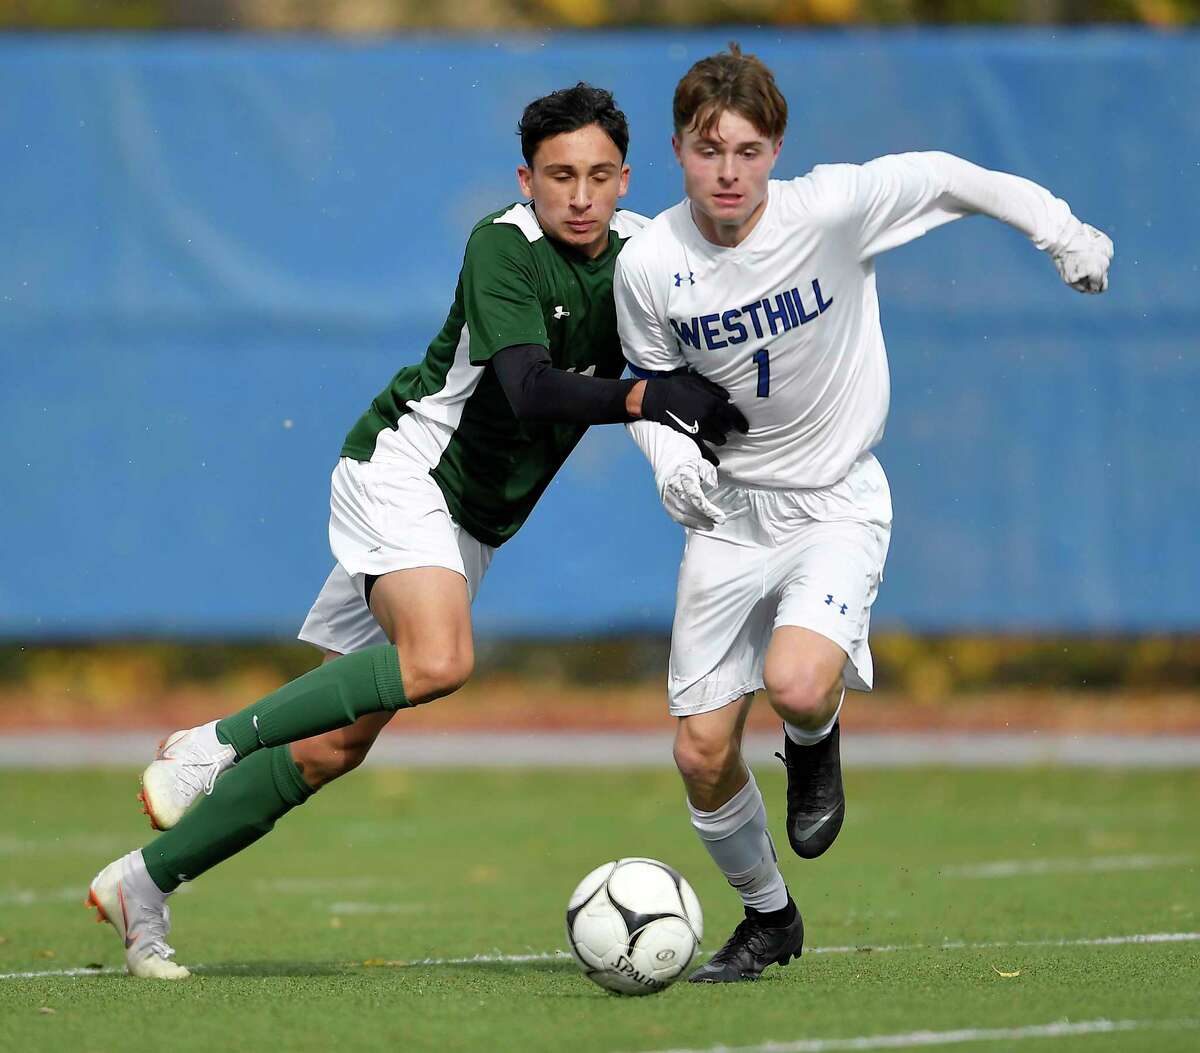 Schalmont?’s Ryan Edwards, left, challenges for the ball against Westhill?’s Charlie Bolesh during a Class B semifinal at the NYSPHSAA Boys Soccer Championships in Middletown, N.Y., Saturday, Nov. 10, 2018. Schalmont's season ended with a 3-1 loss to Westhill-III. (Adrian Kraus / Special to the Times Union)